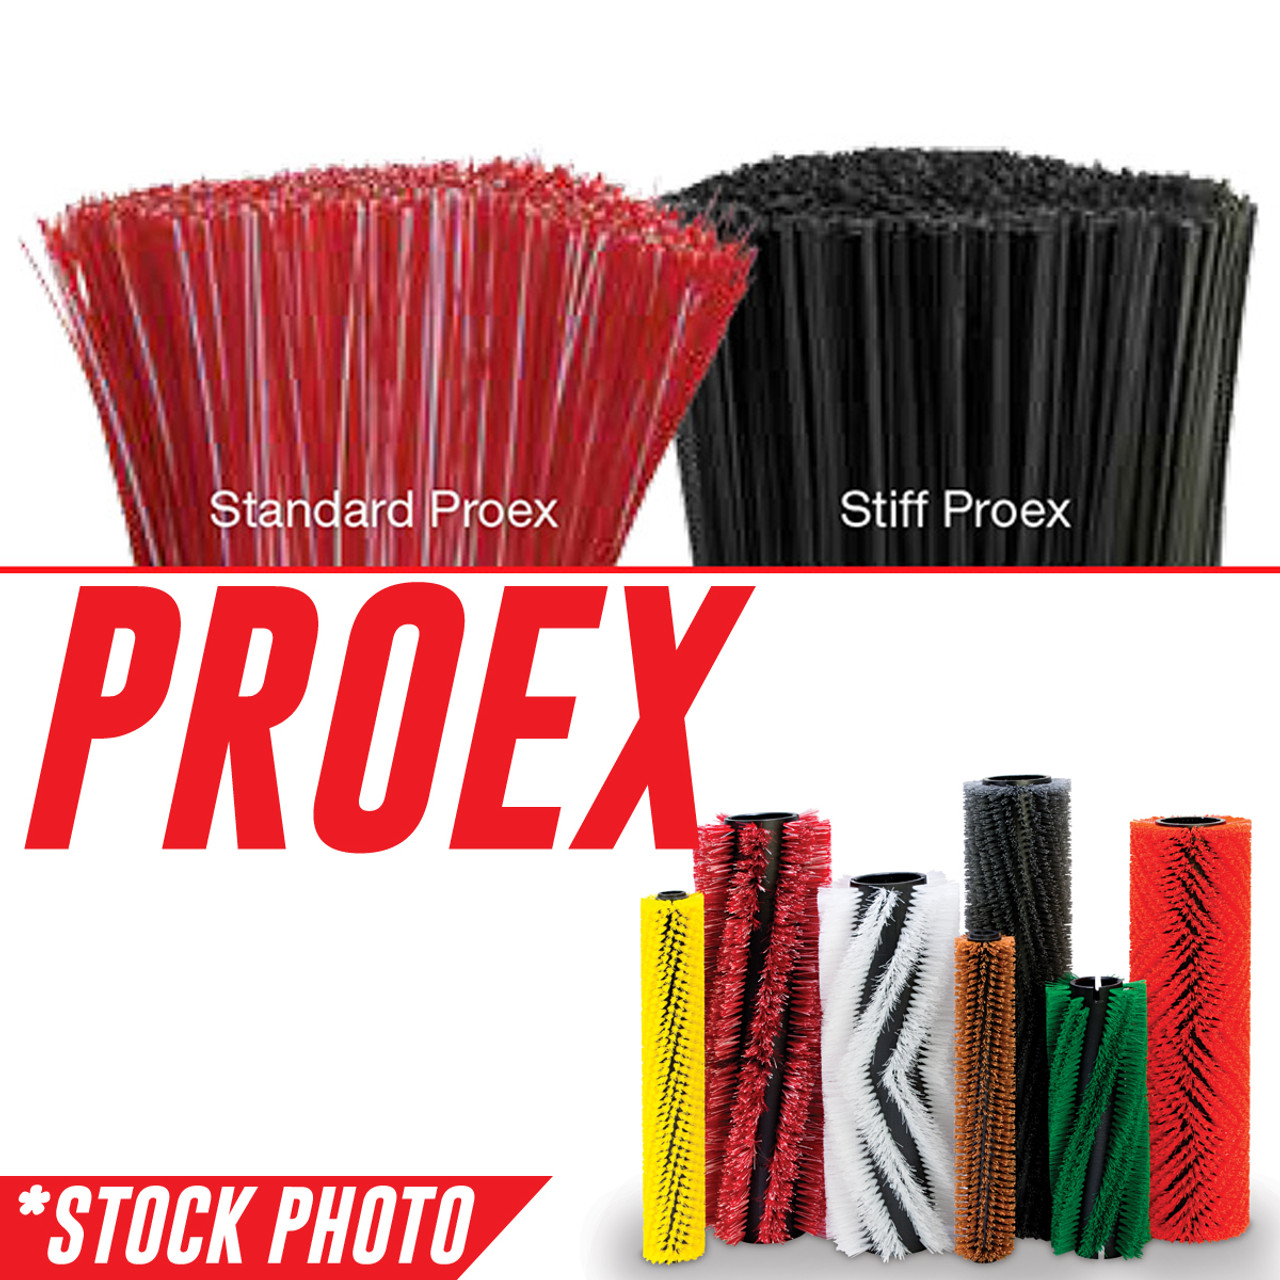 56507424: 50" Cylindrical Brush 8 Double Row Proex/Wire fits Advance-Nilfisk Models Exterra, SW8000